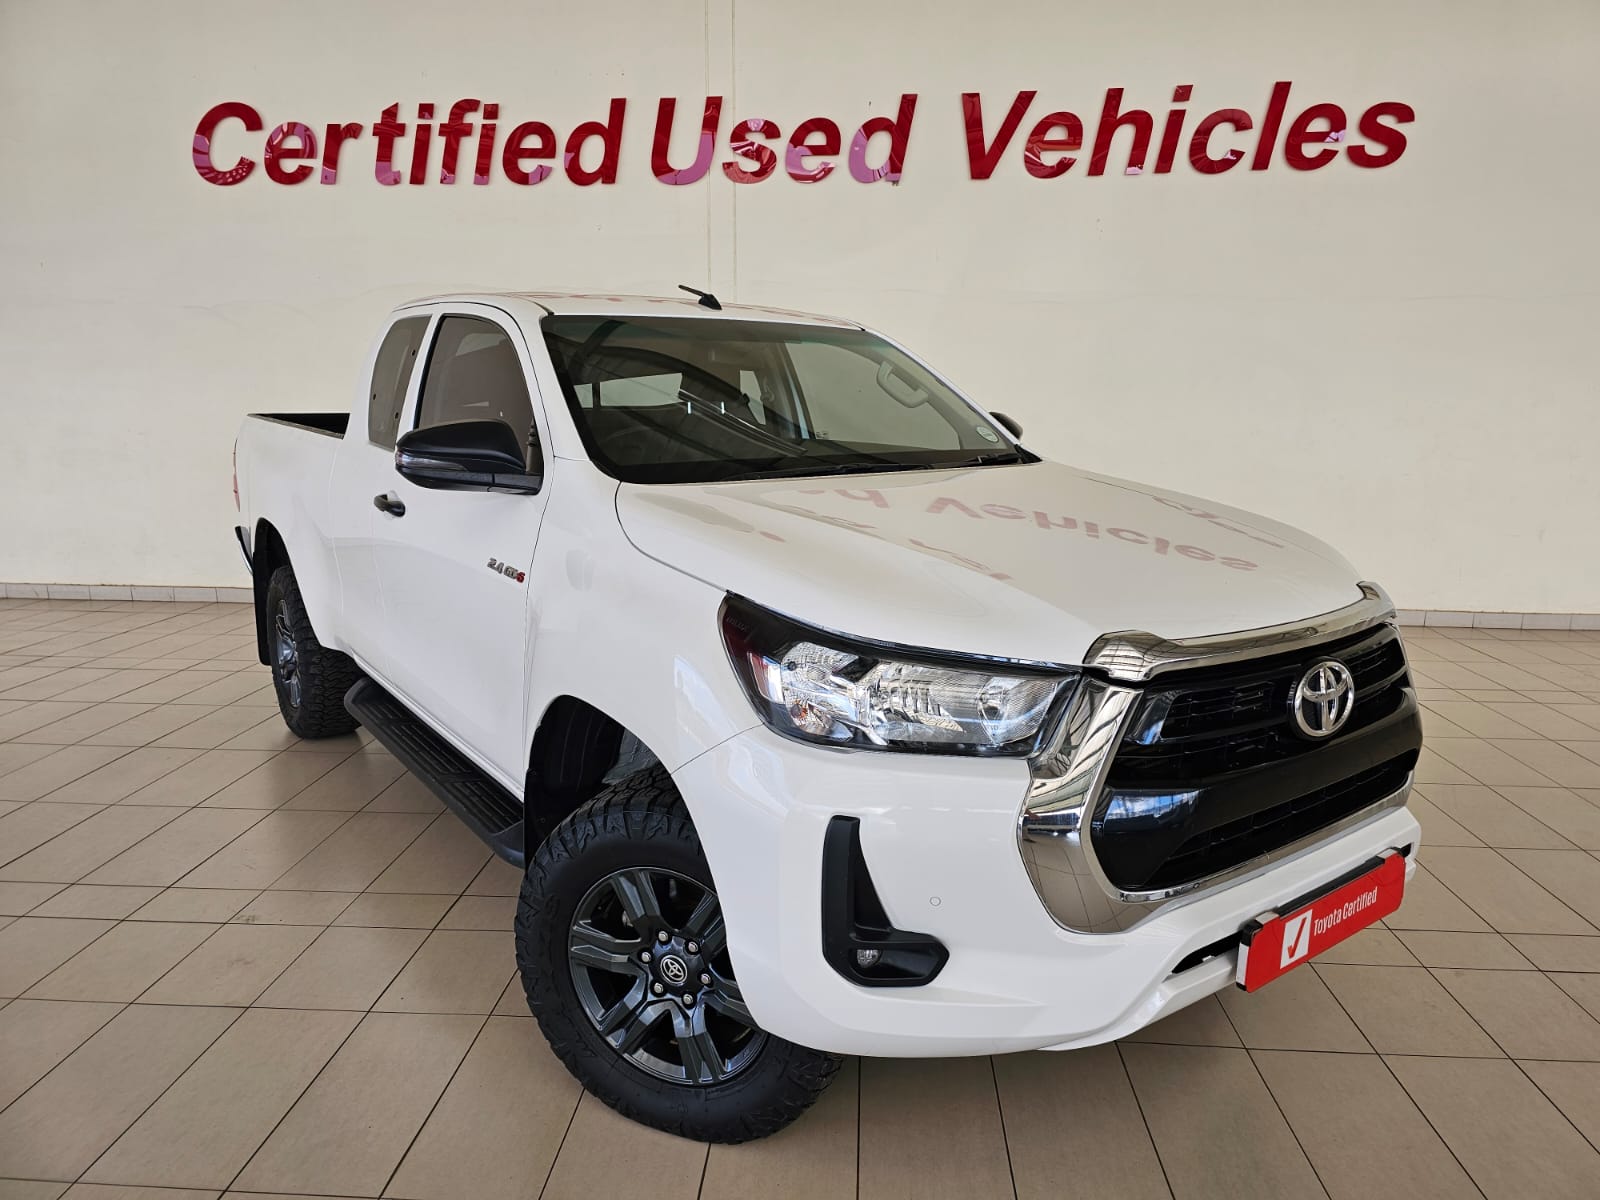 2021 Toyota Hilux Xtra Cab  for sale - 180261/1